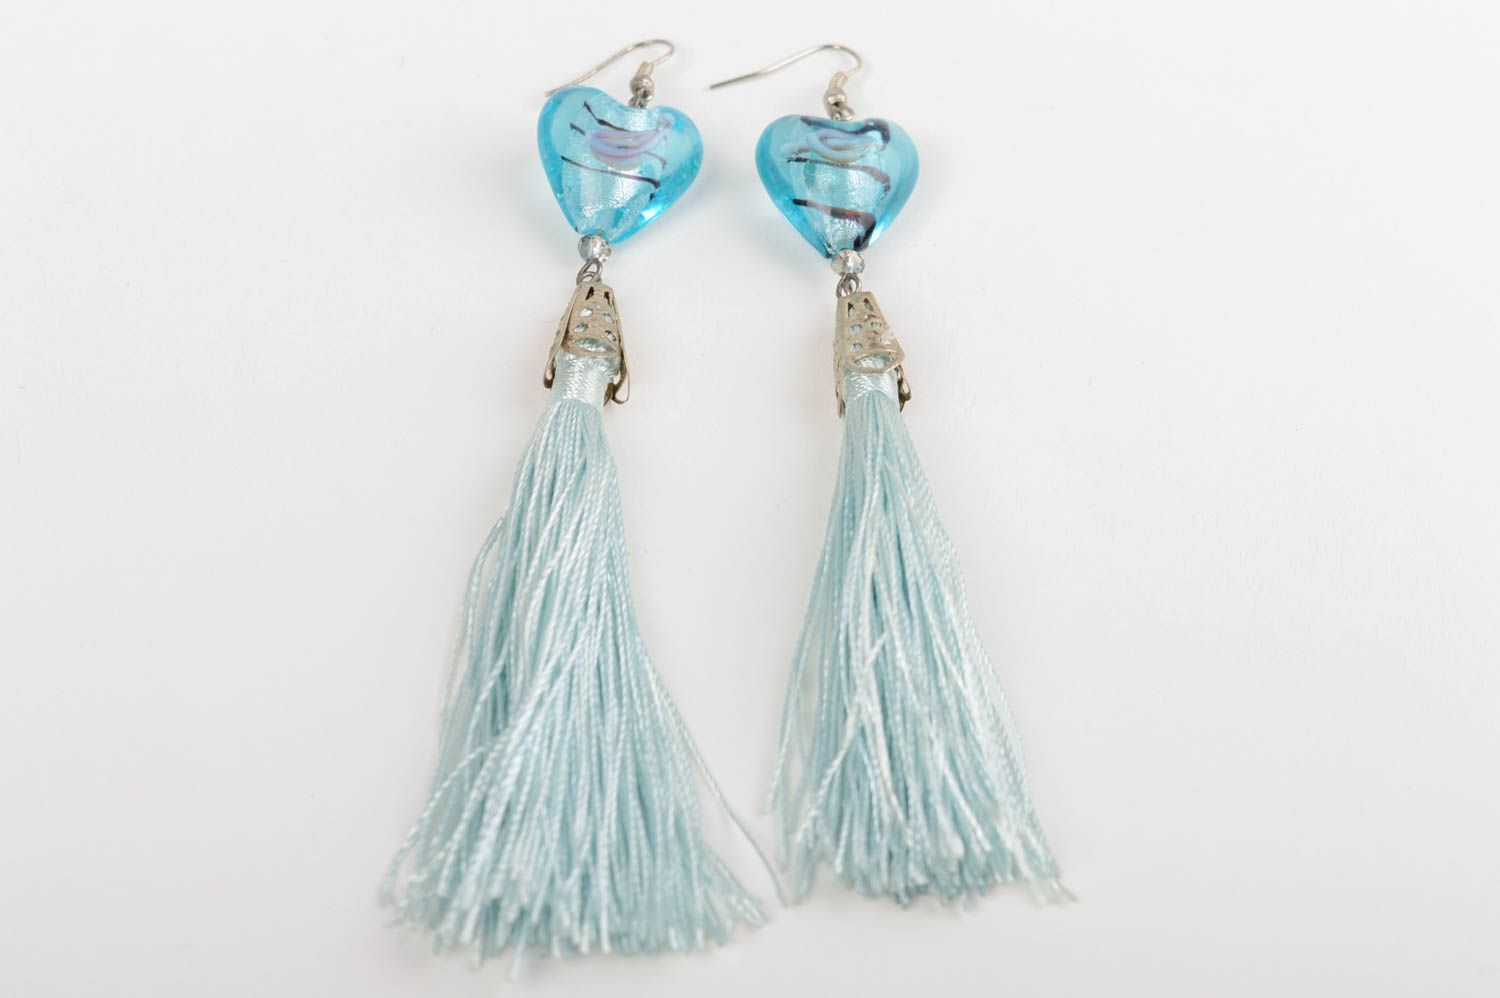 Handmade long earrings with tassels and glass beads in blue color fancy jewelry photo 4